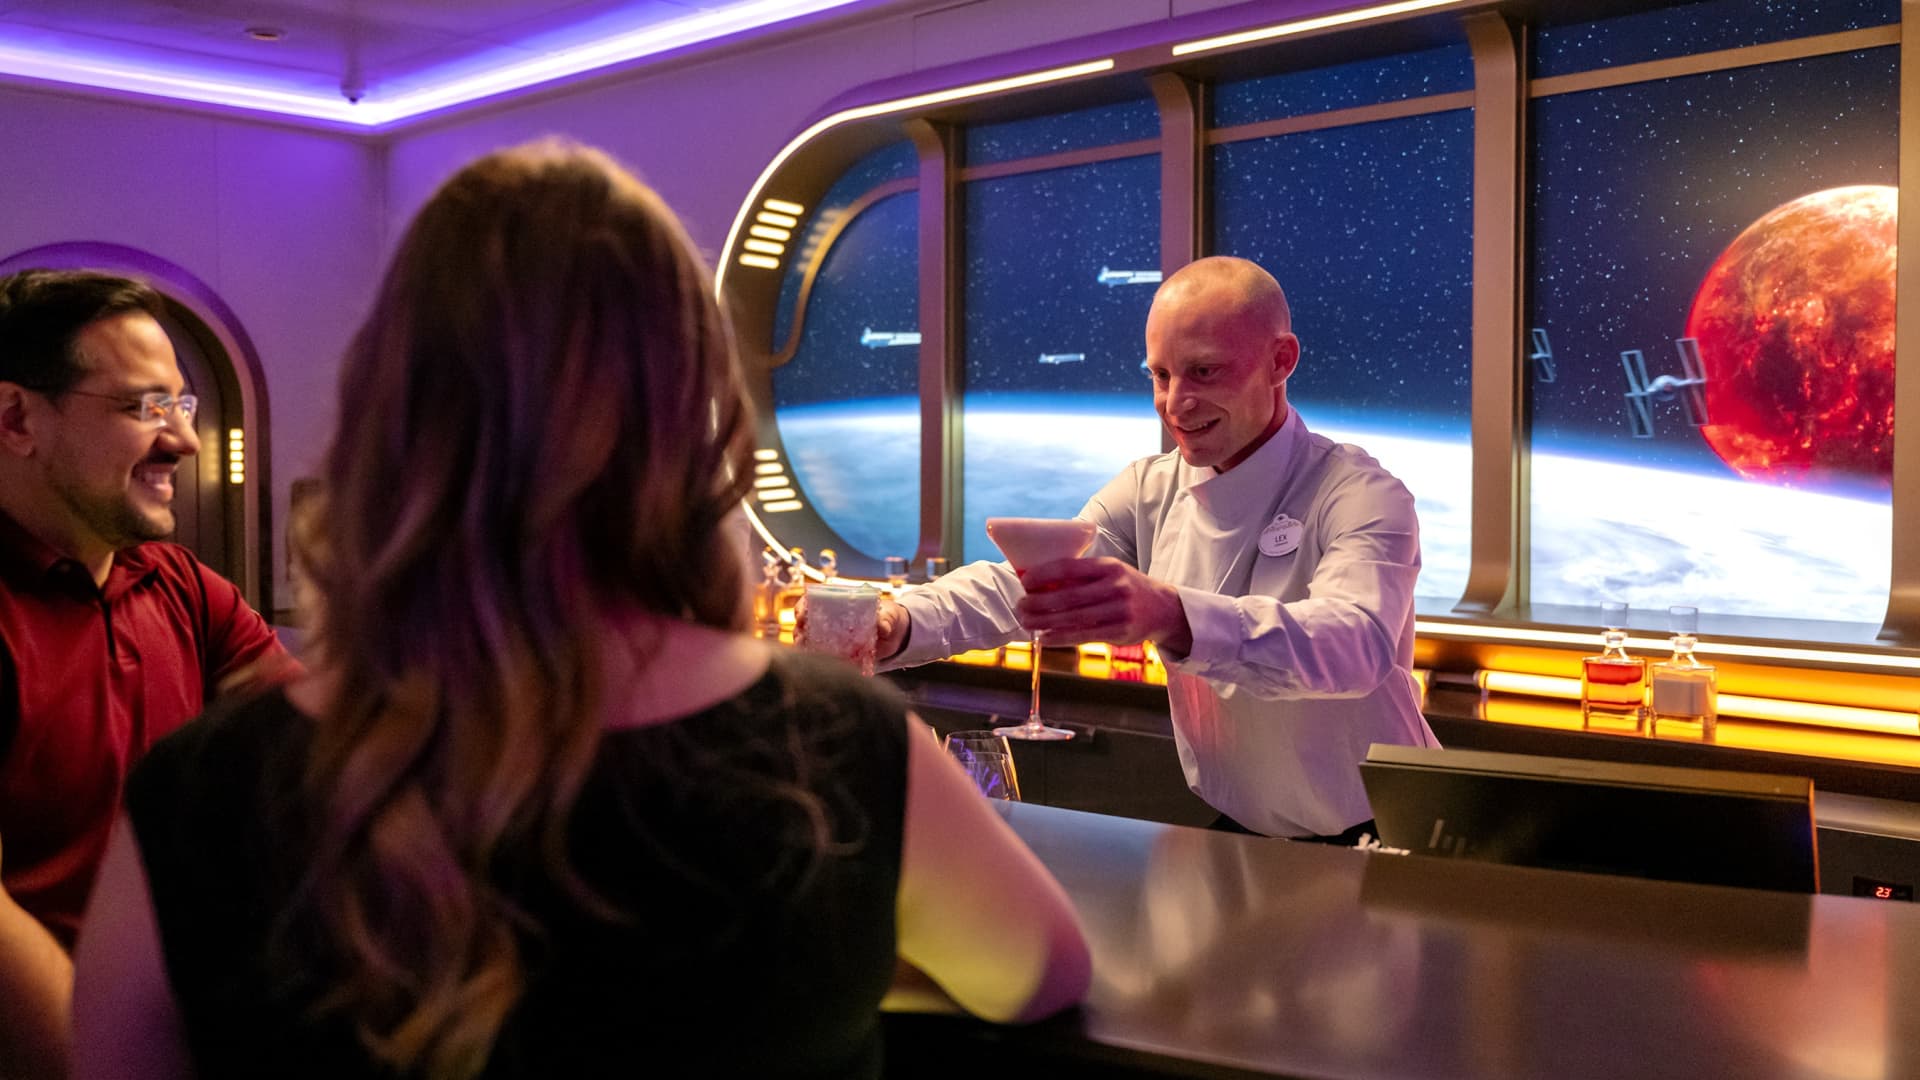 For the first time on a Disney ship, guests embark on a space-jumping tour of the Star Wars galaxy at Star Wars: Hyperspace Lounge, a high-end bar styled as a luxurious yacht-class spaceship aboard the Disney Wish.